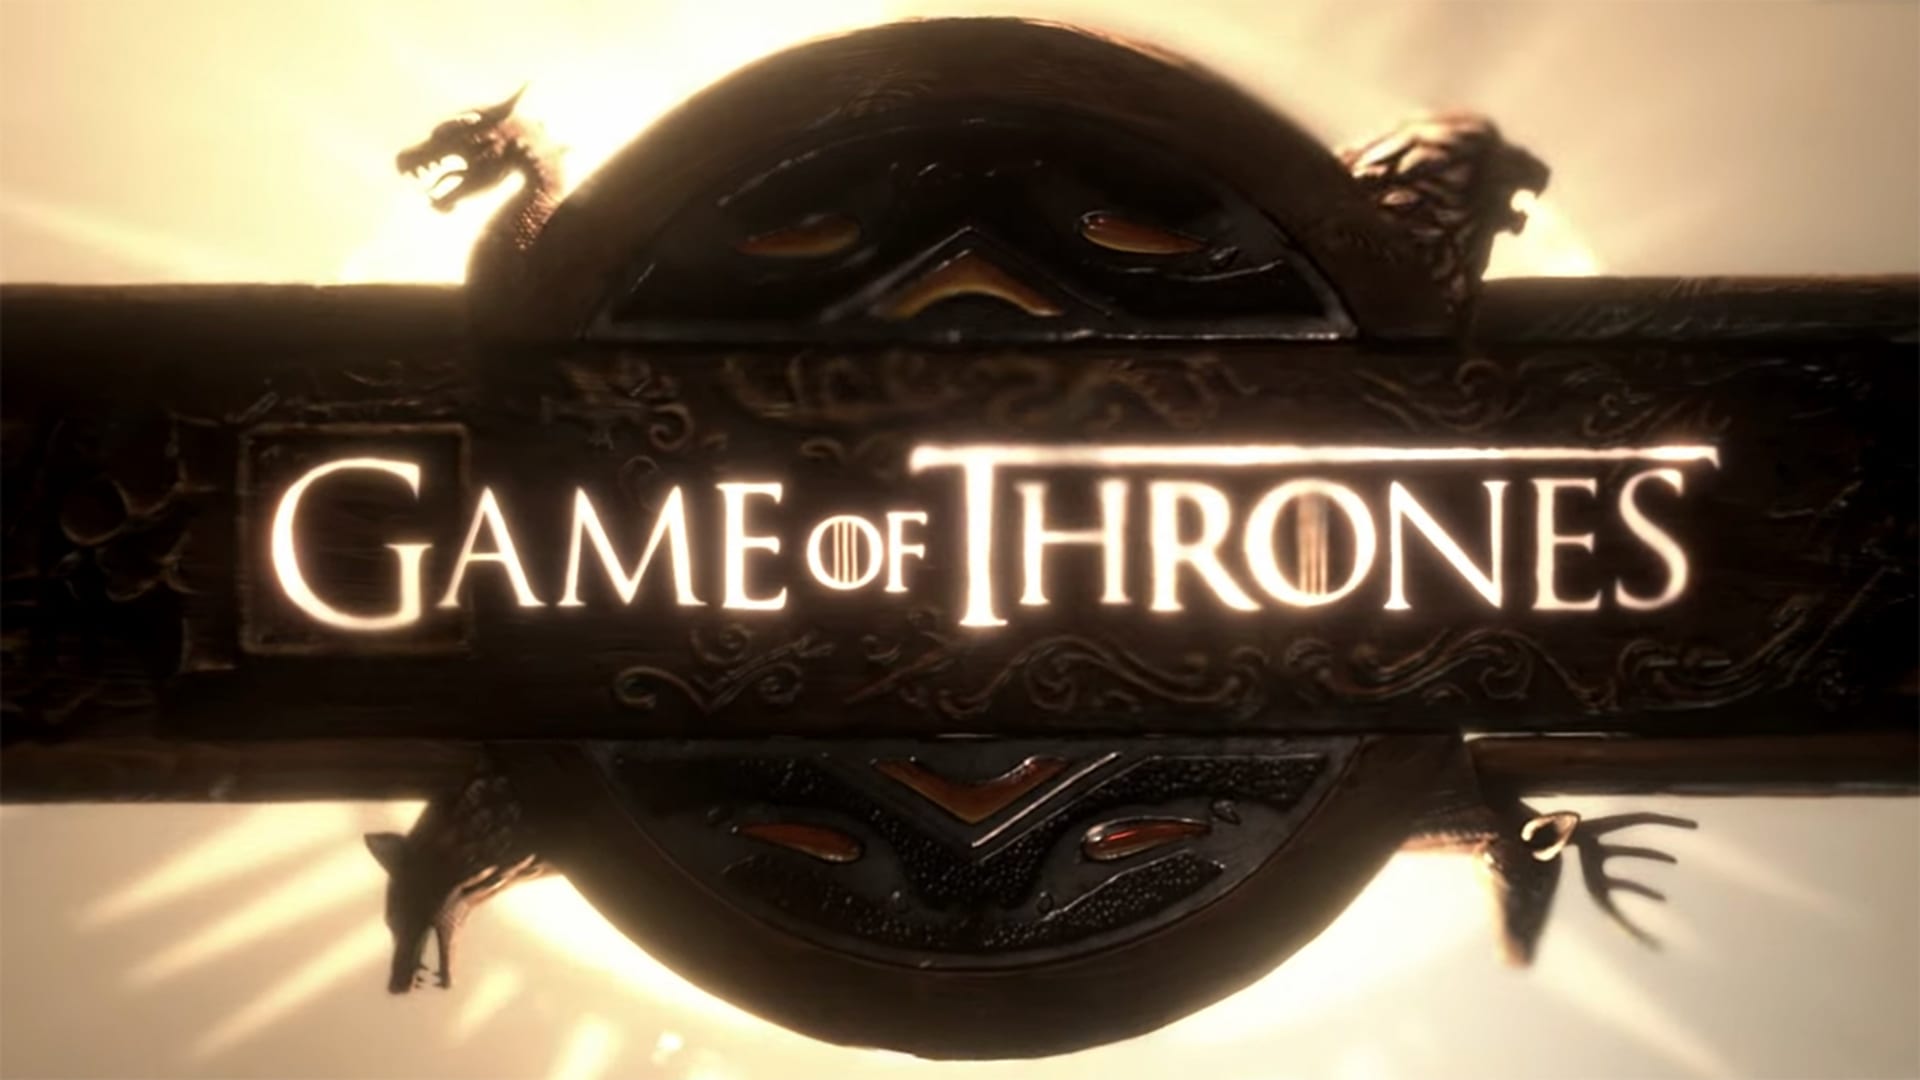 The story behind the redesigned Game of Thrones title sequence